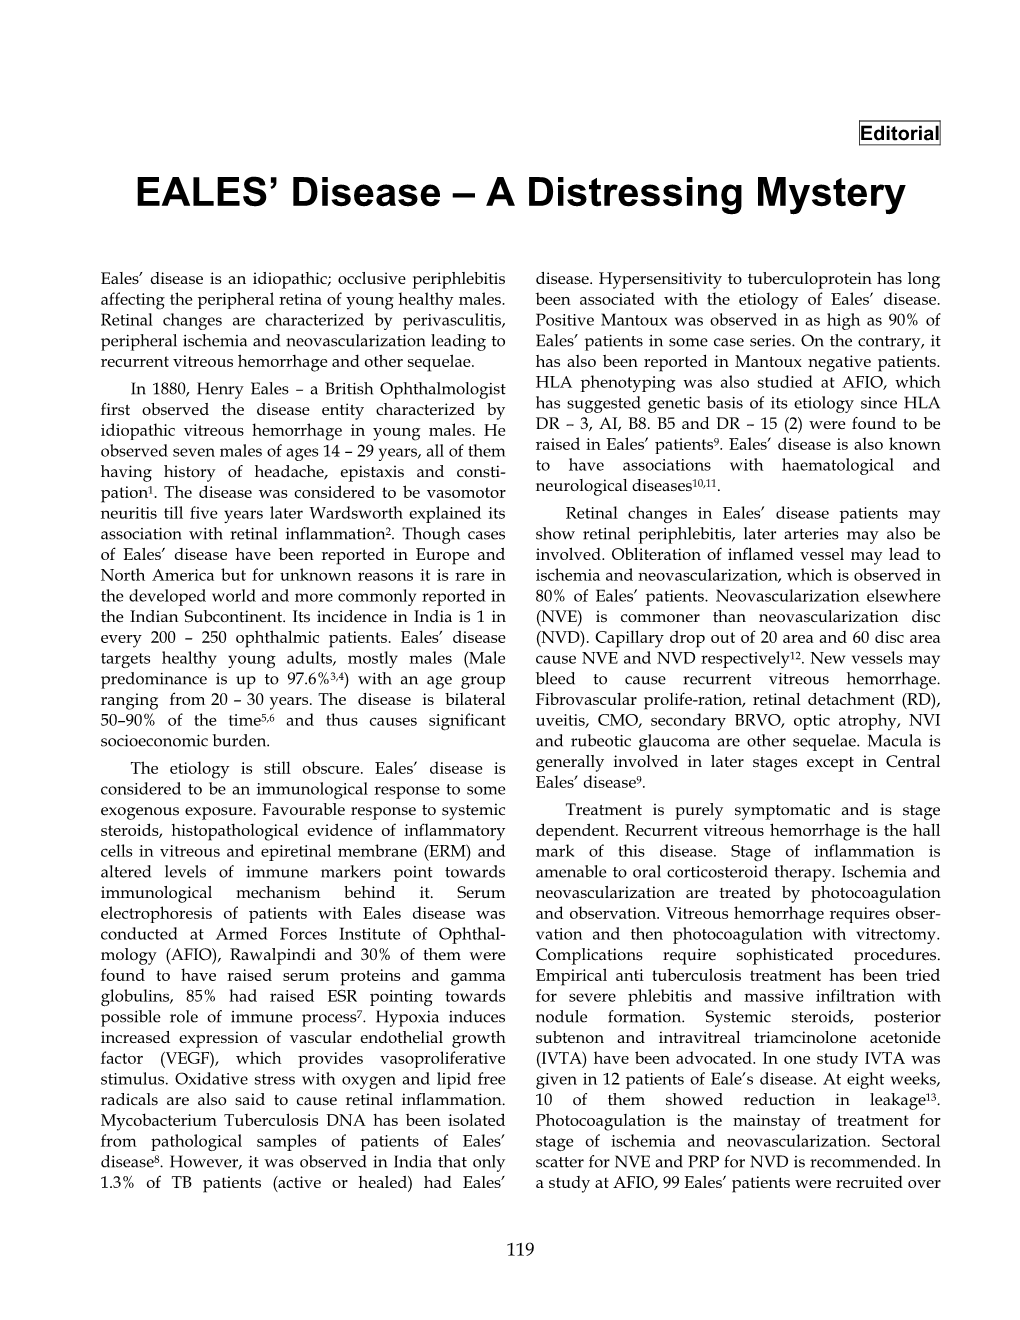 EALES' Disease – a Distressing Mystery